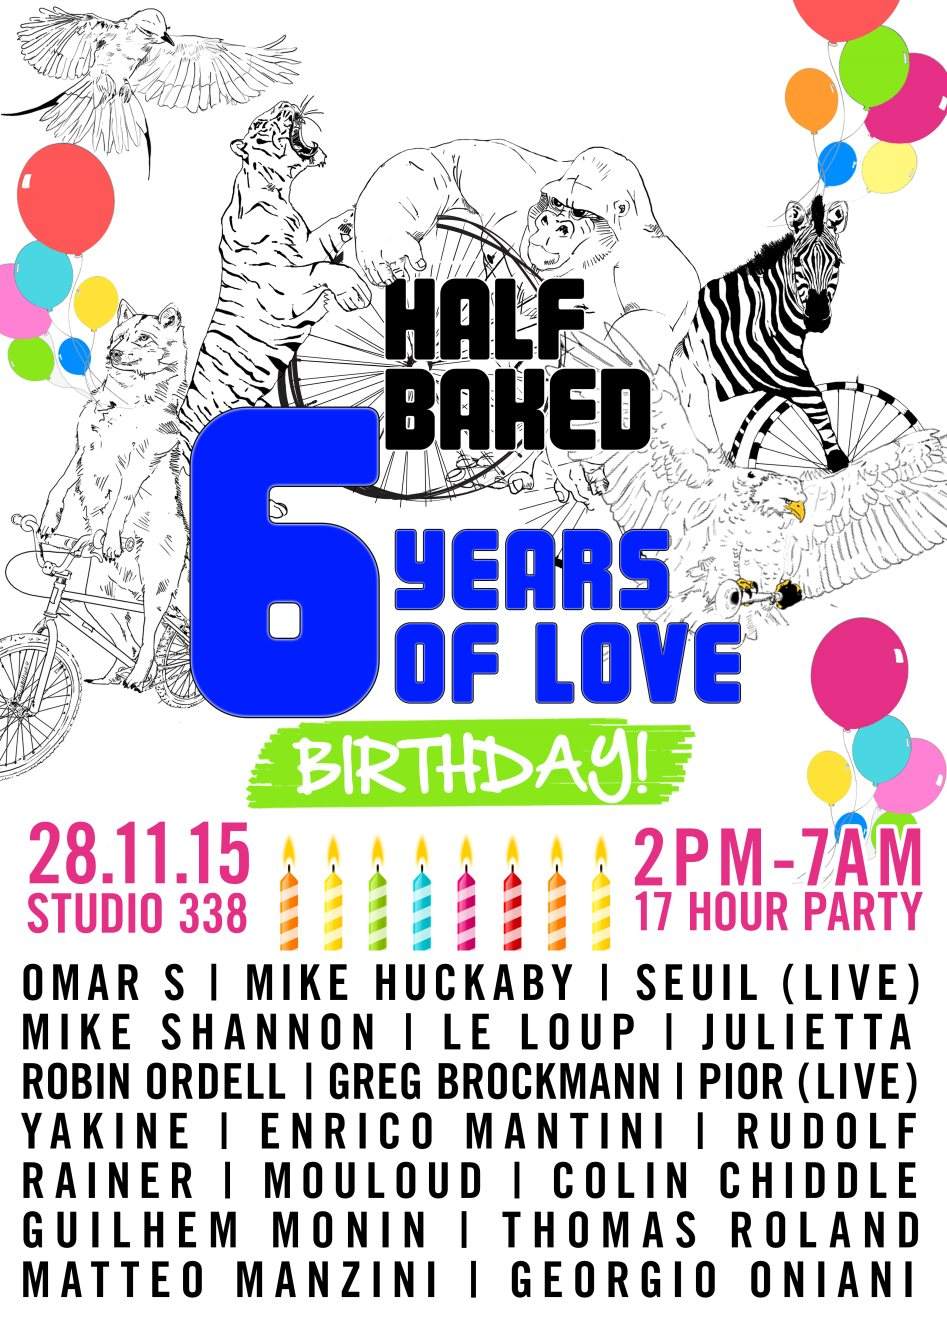 Half Baked 6th Birthday Party - 22 Artists + Live Art + Performances + Workshops - フライヤー表